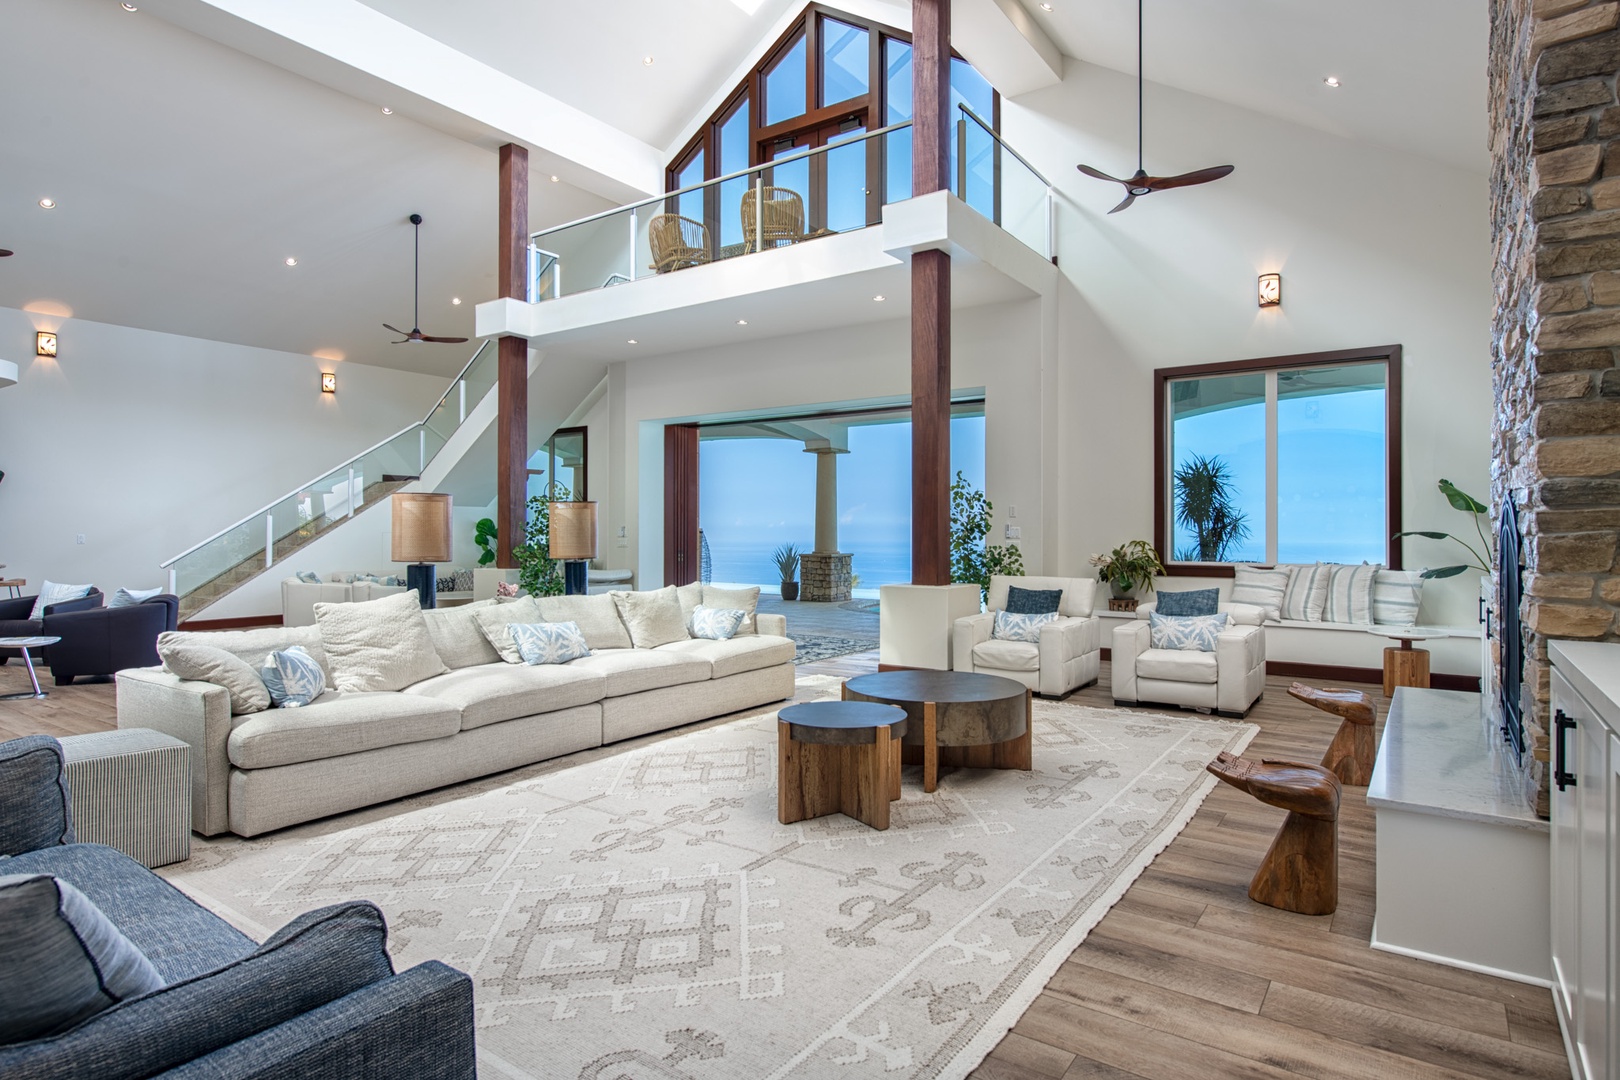 Kailua Kona Vacation Rentals, Kailua Kona Estate** - A welcoming and airy living space with vaulted ceilings and wall-to-wall windows, offering unobstructed ocean views for a serene living experience.